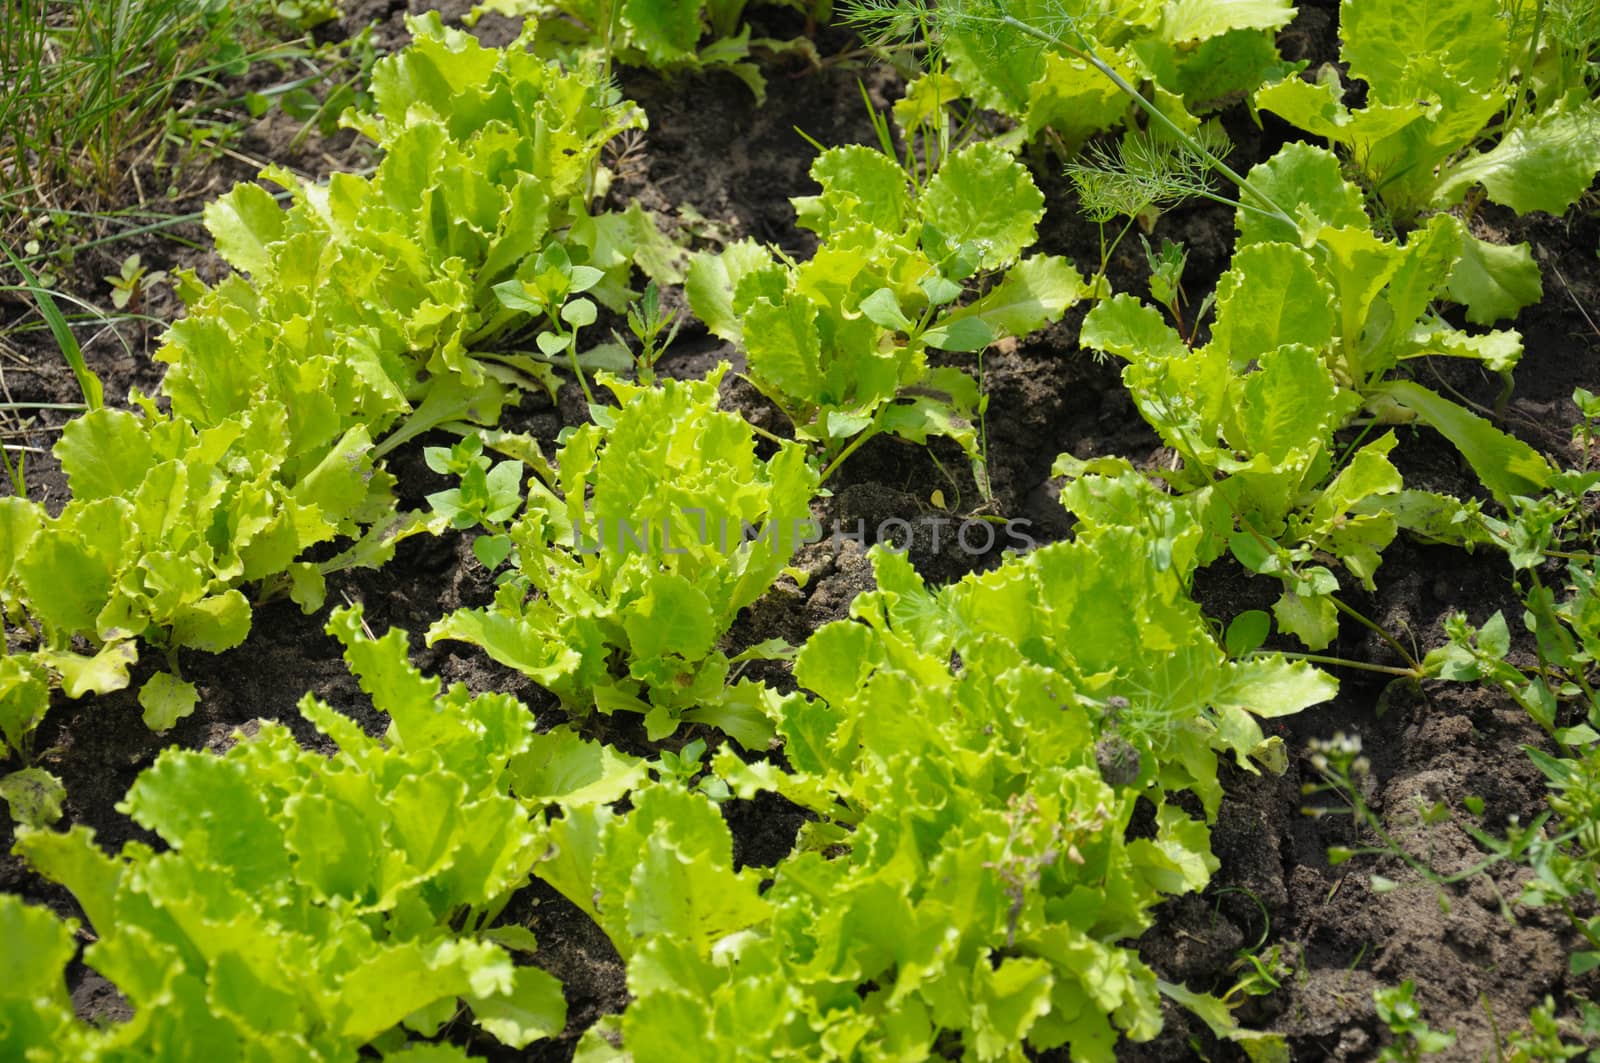 The rows of lettuce planting in a natural scene